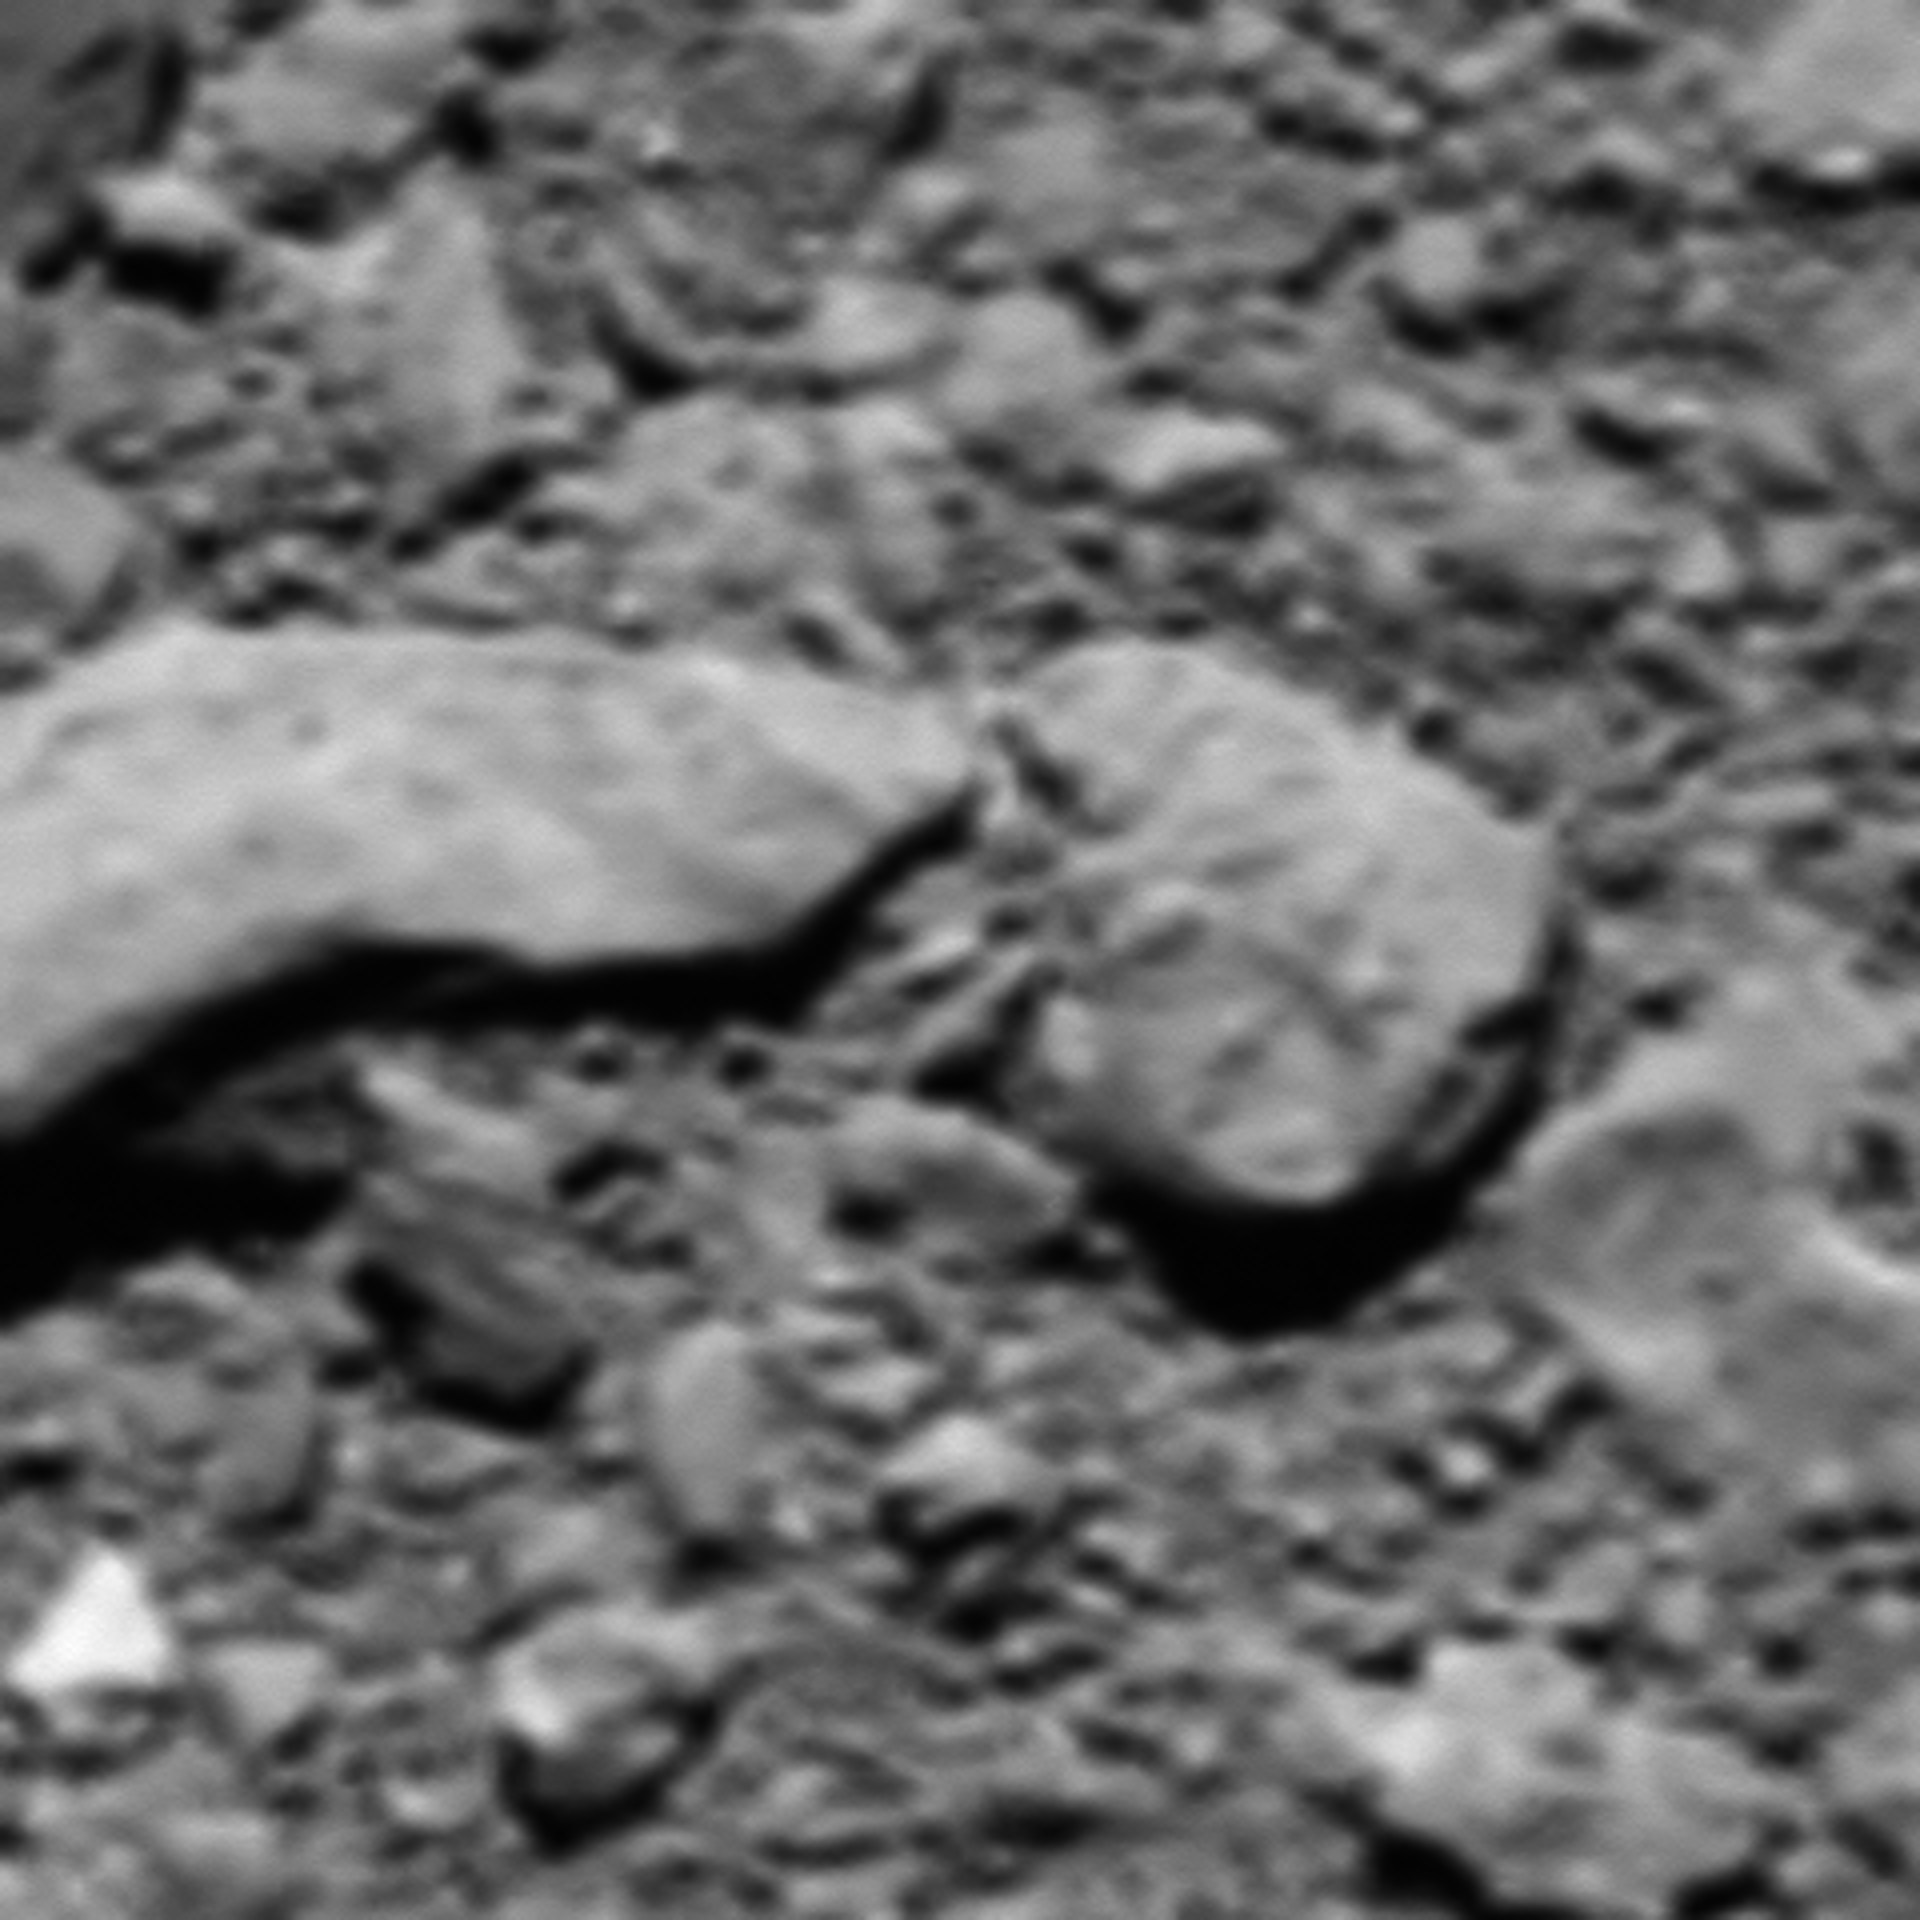 Reconstructed last image from Rosetta